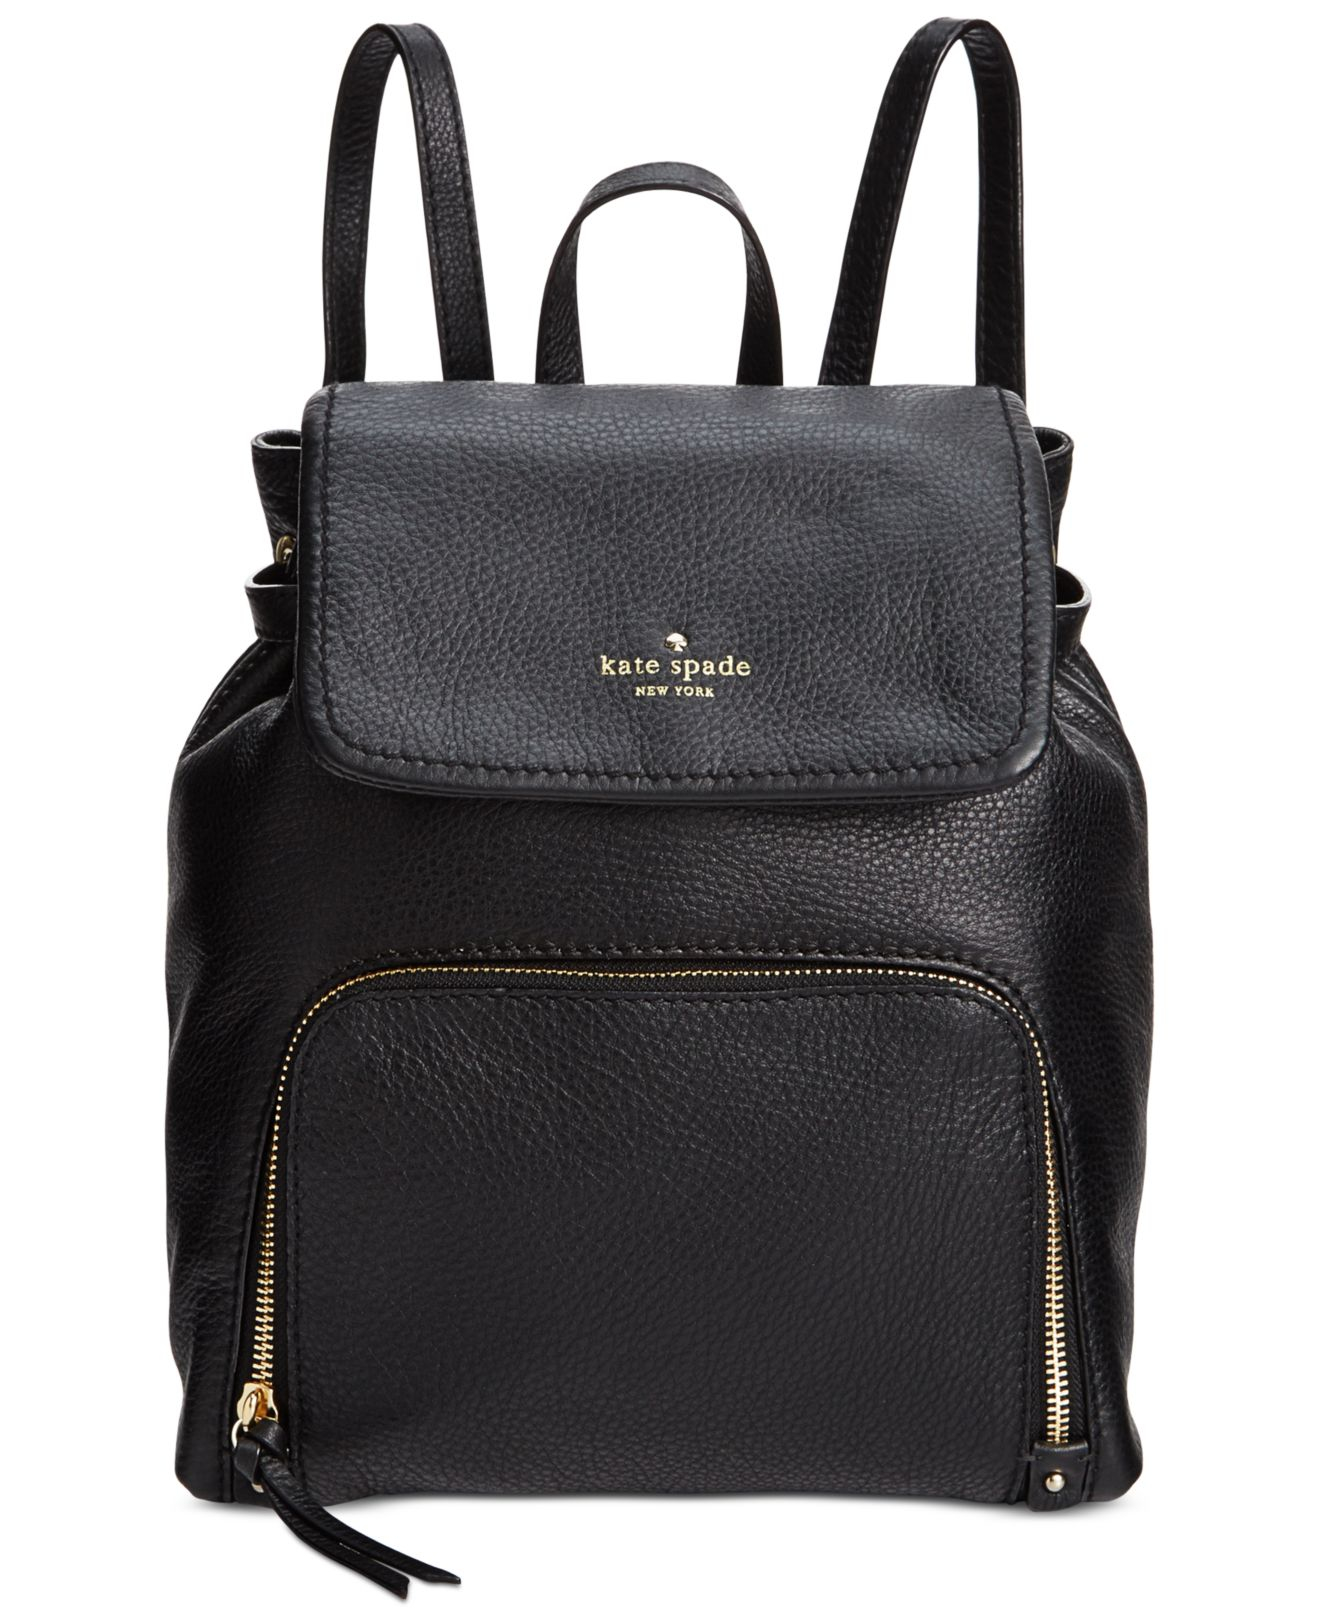 kate-spade-new-york-black-cobble-hill-charley-backpack-product-0-262233823-normal.jpeg